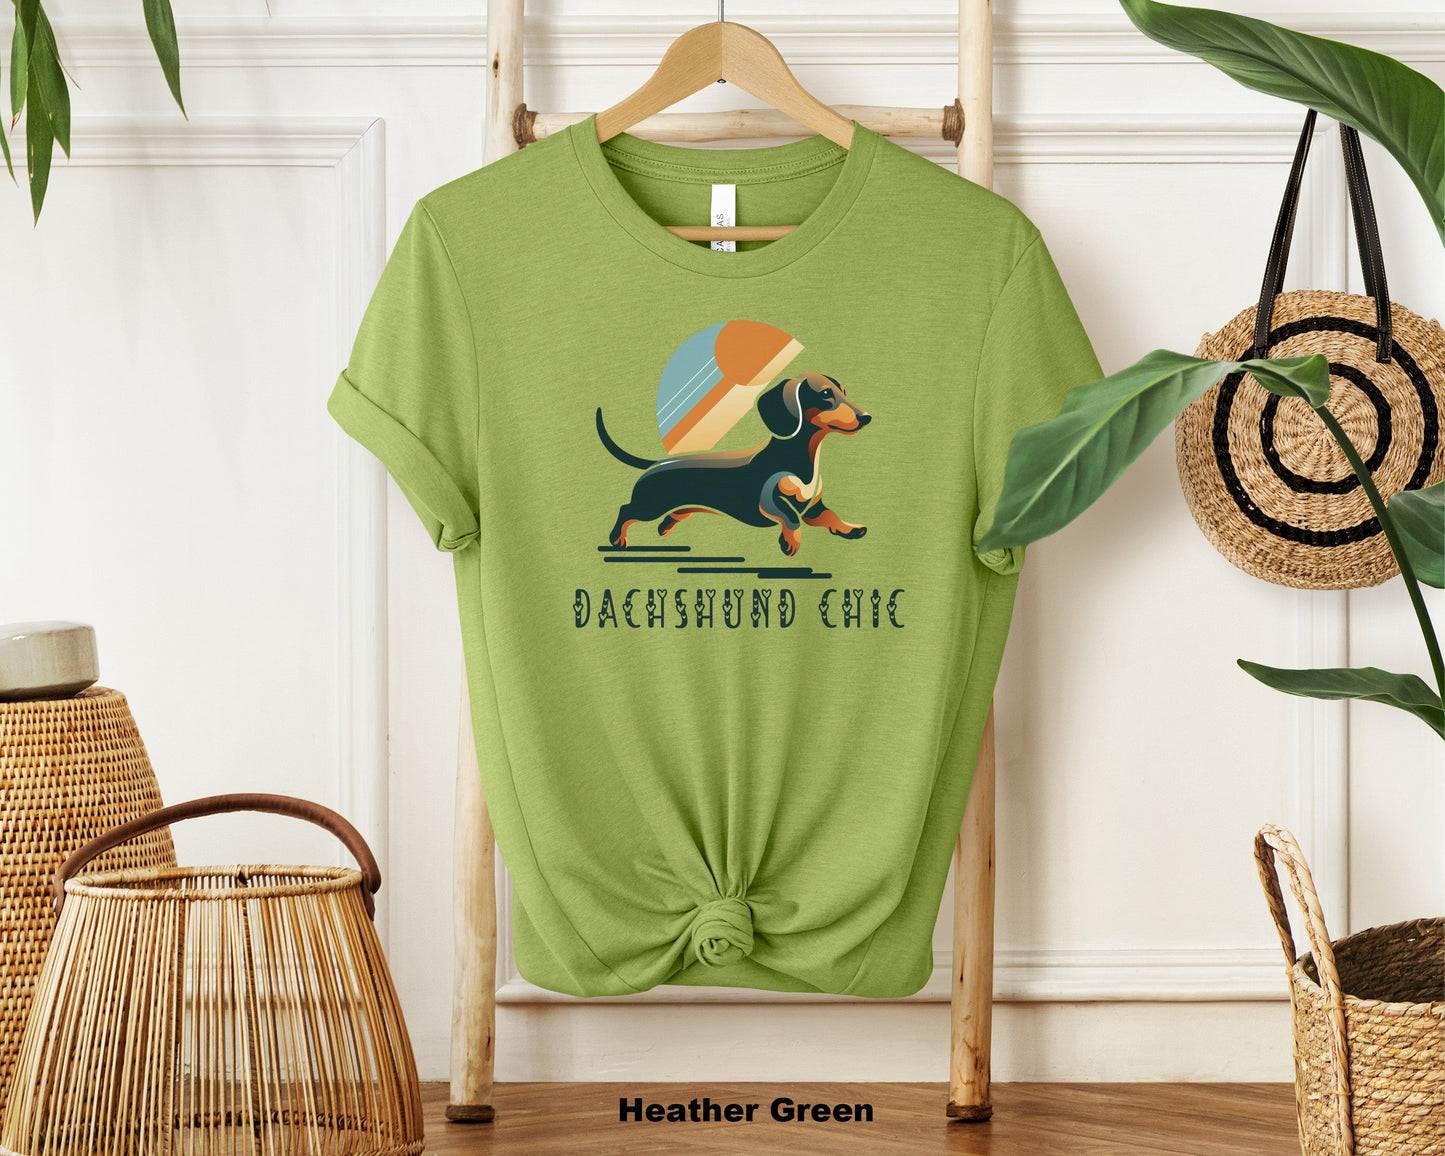 "Dachshund Chic Soft Cotton Unisex Short Sleeve T-Shirt with Cute Dog Print - Ideal for Dachshund Lovers and Pet Owners"